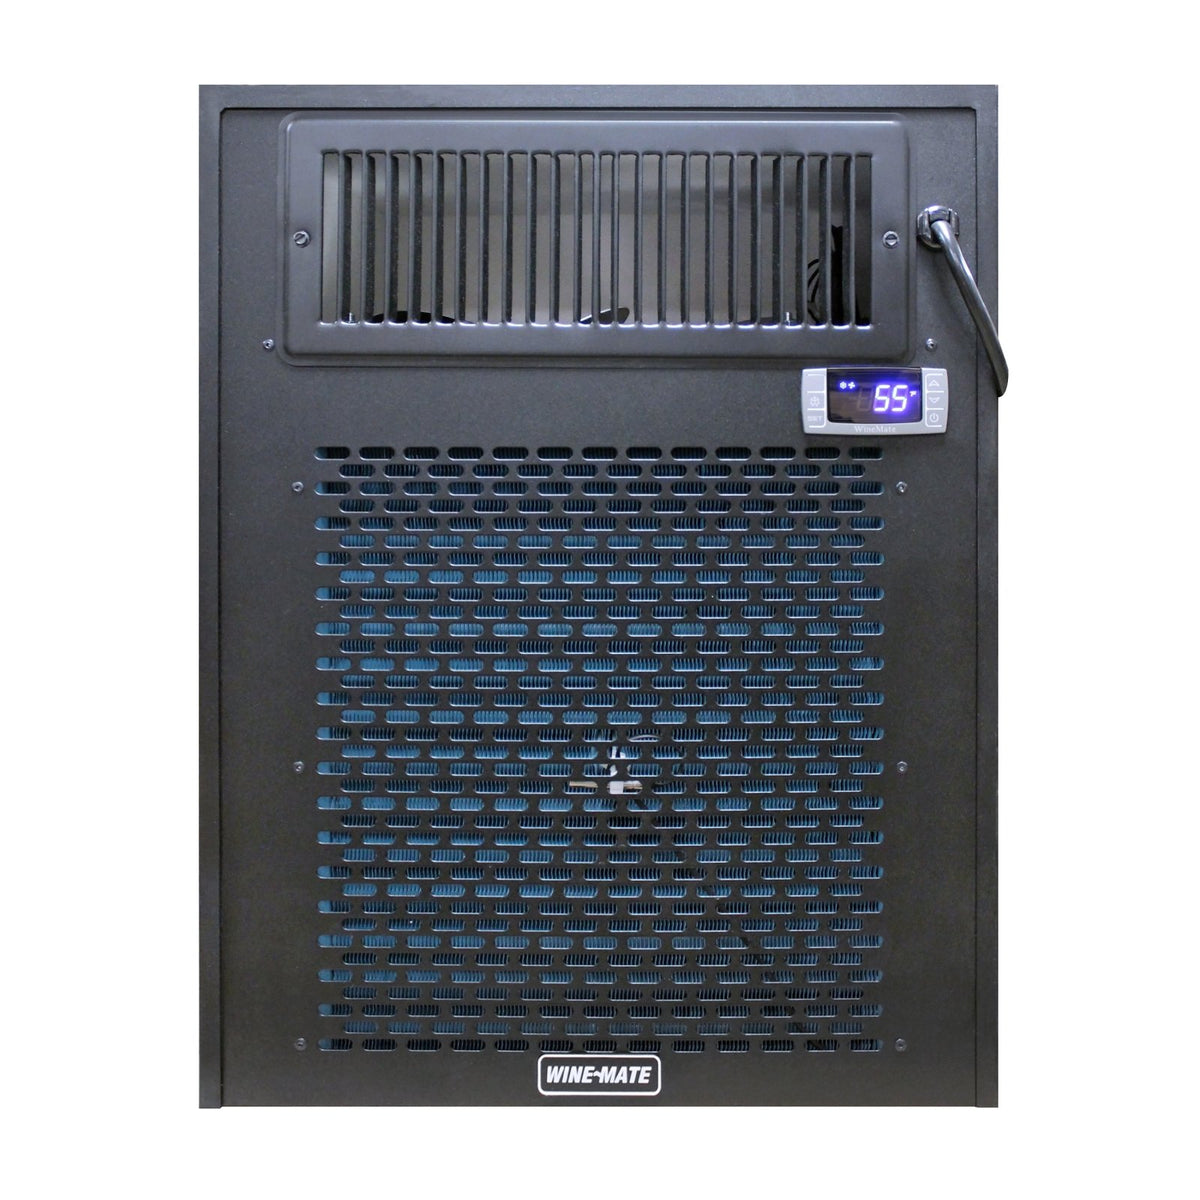 Wine - Mate WM - 6500HZD Self - Contained All - in - One Wine Cellar Cooling System, 1500 cu. ft. Capacity, in Black (WM - 6500 - HZD) - TheChefStore.Com